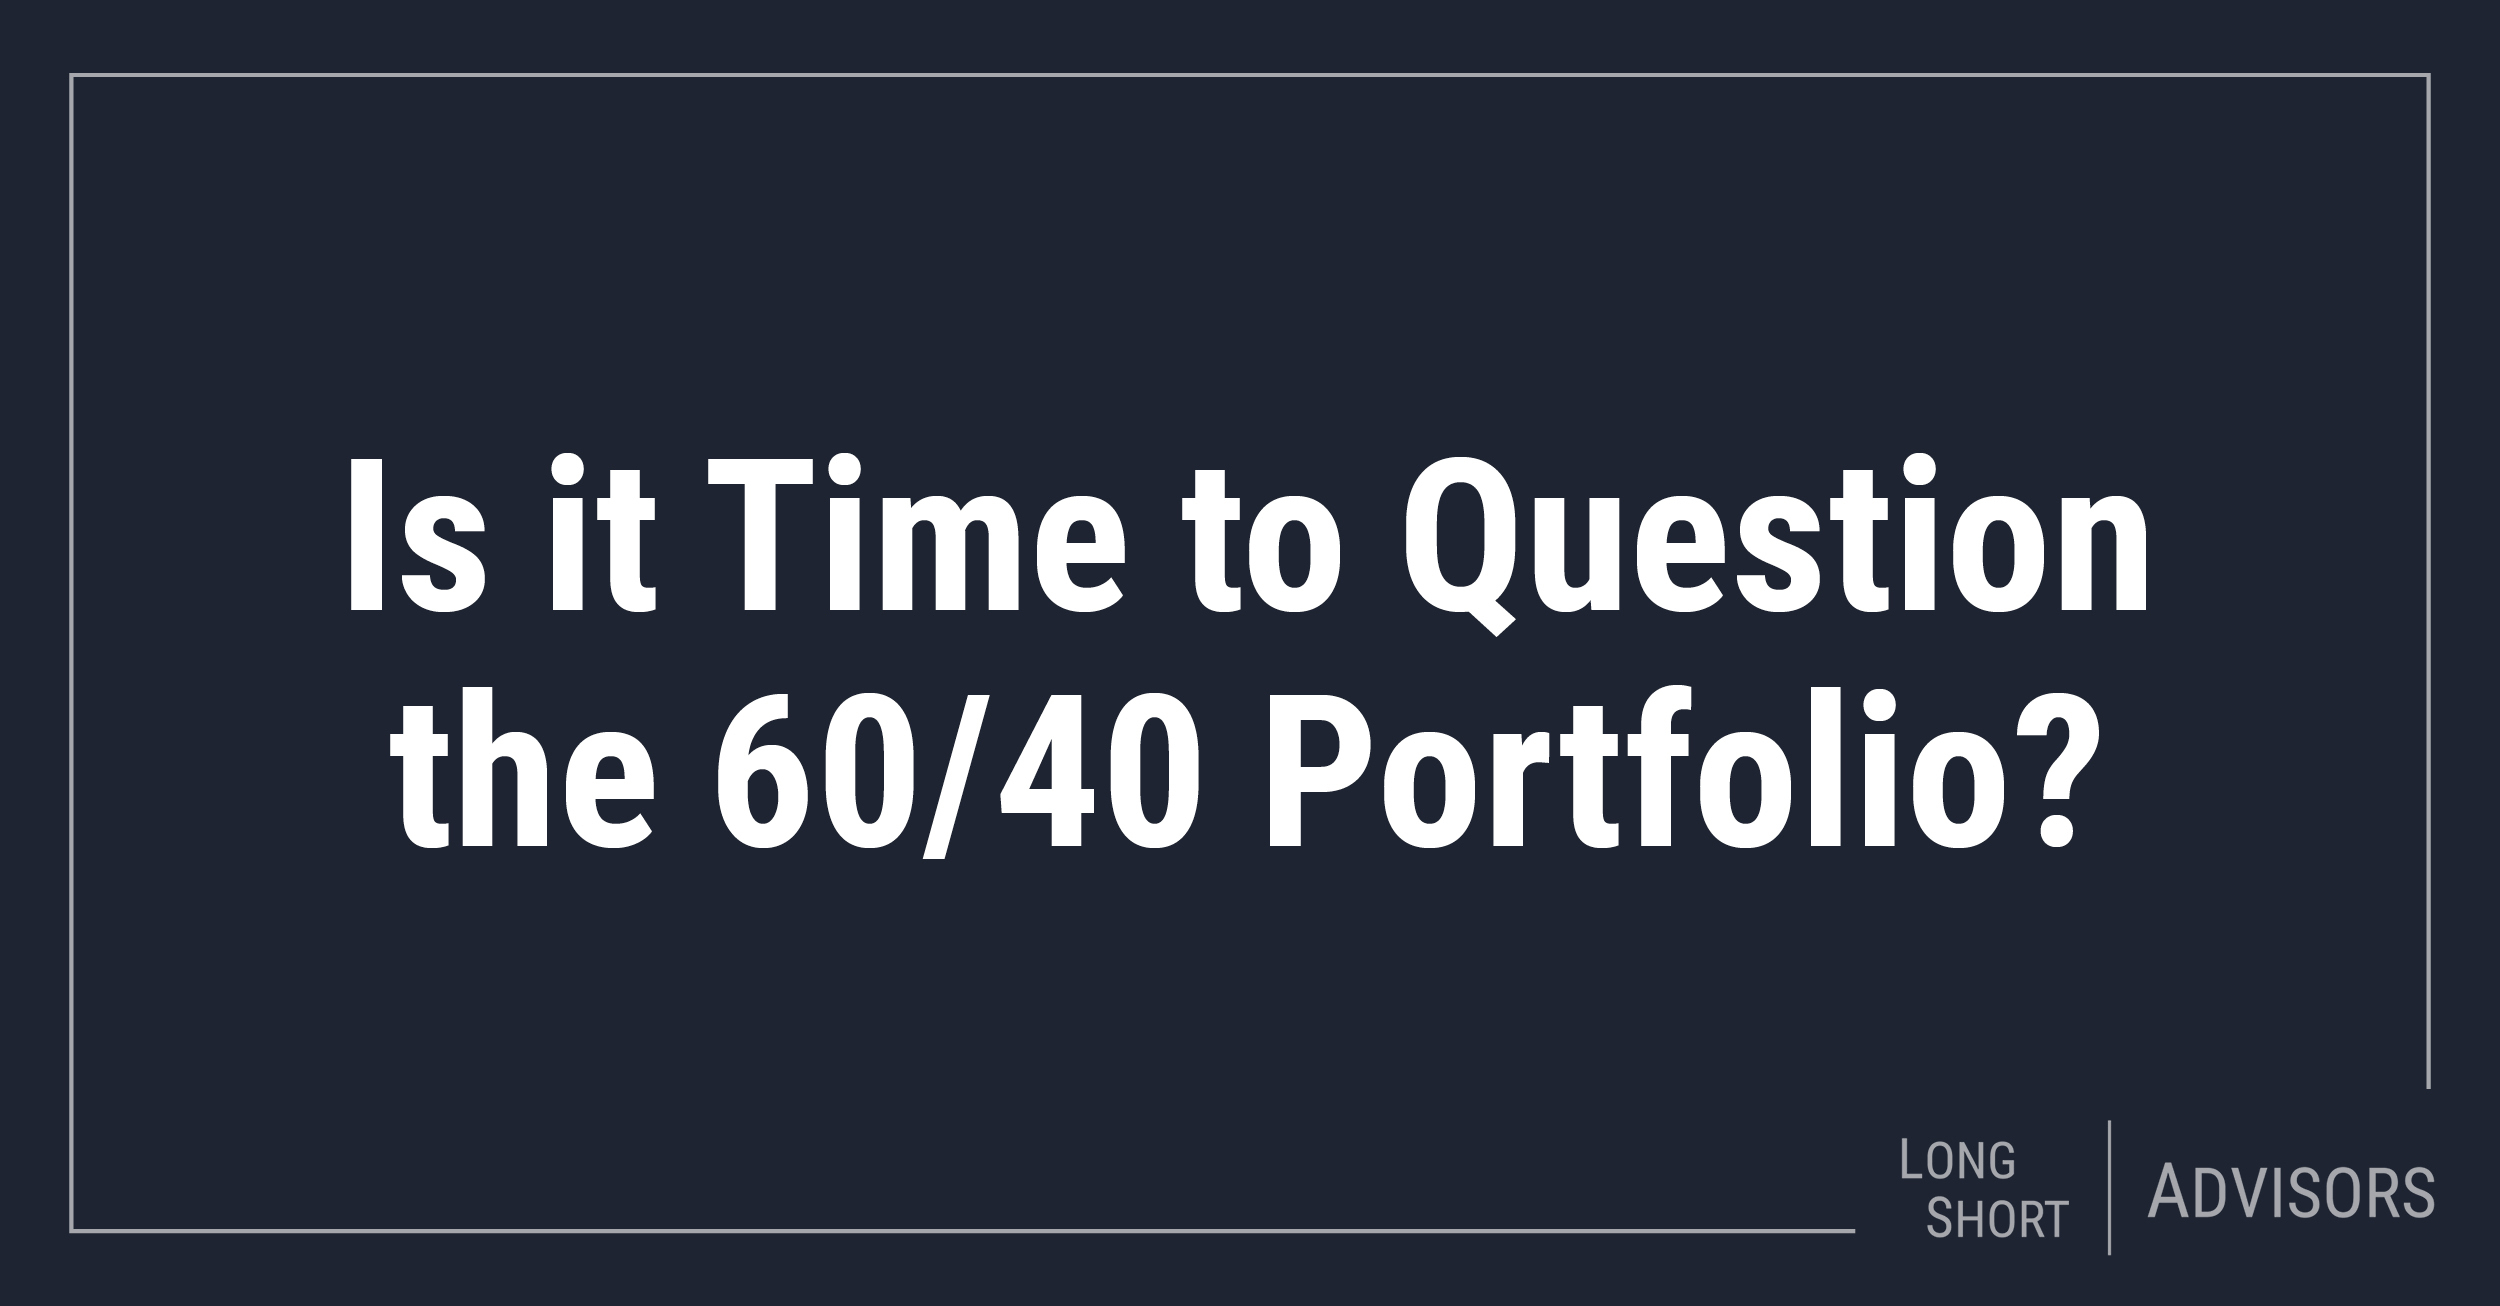 Is It Time to Question the 60/40 Portfolio?